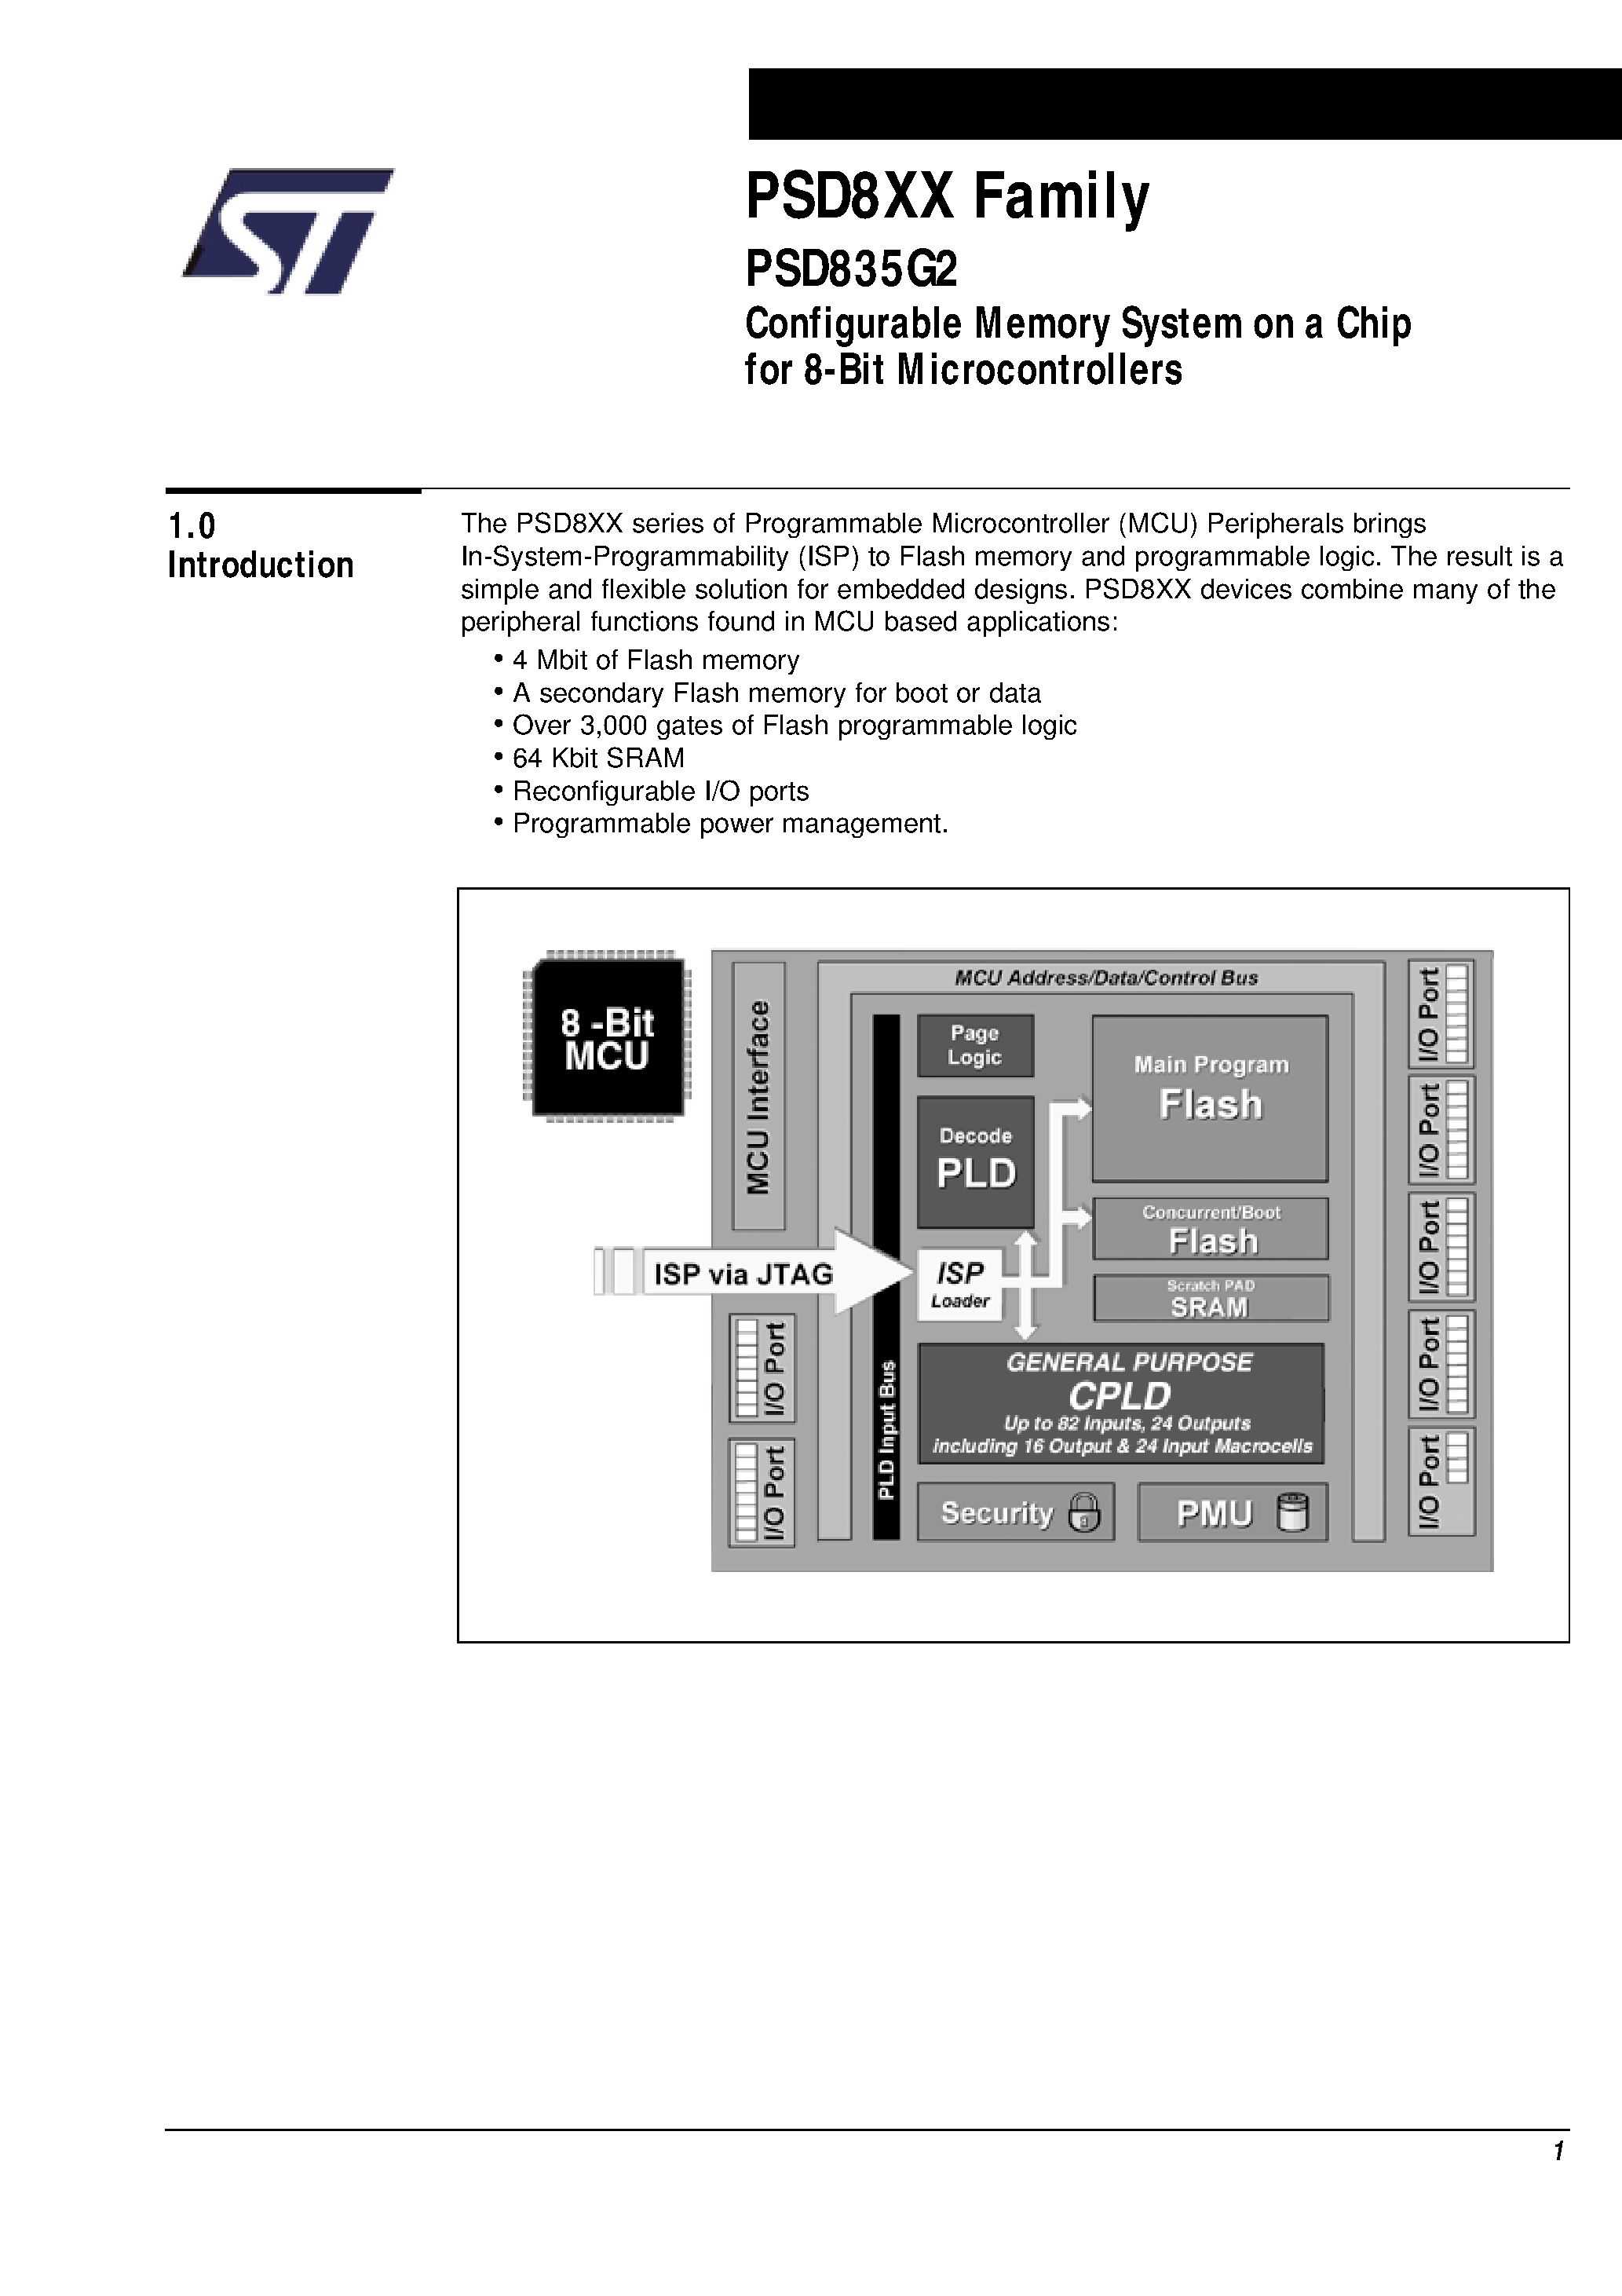 Datasheet PSD835F2-A-90JI - Configurable Memory System on a Chip for 8-Bit Microcontrollers page 2